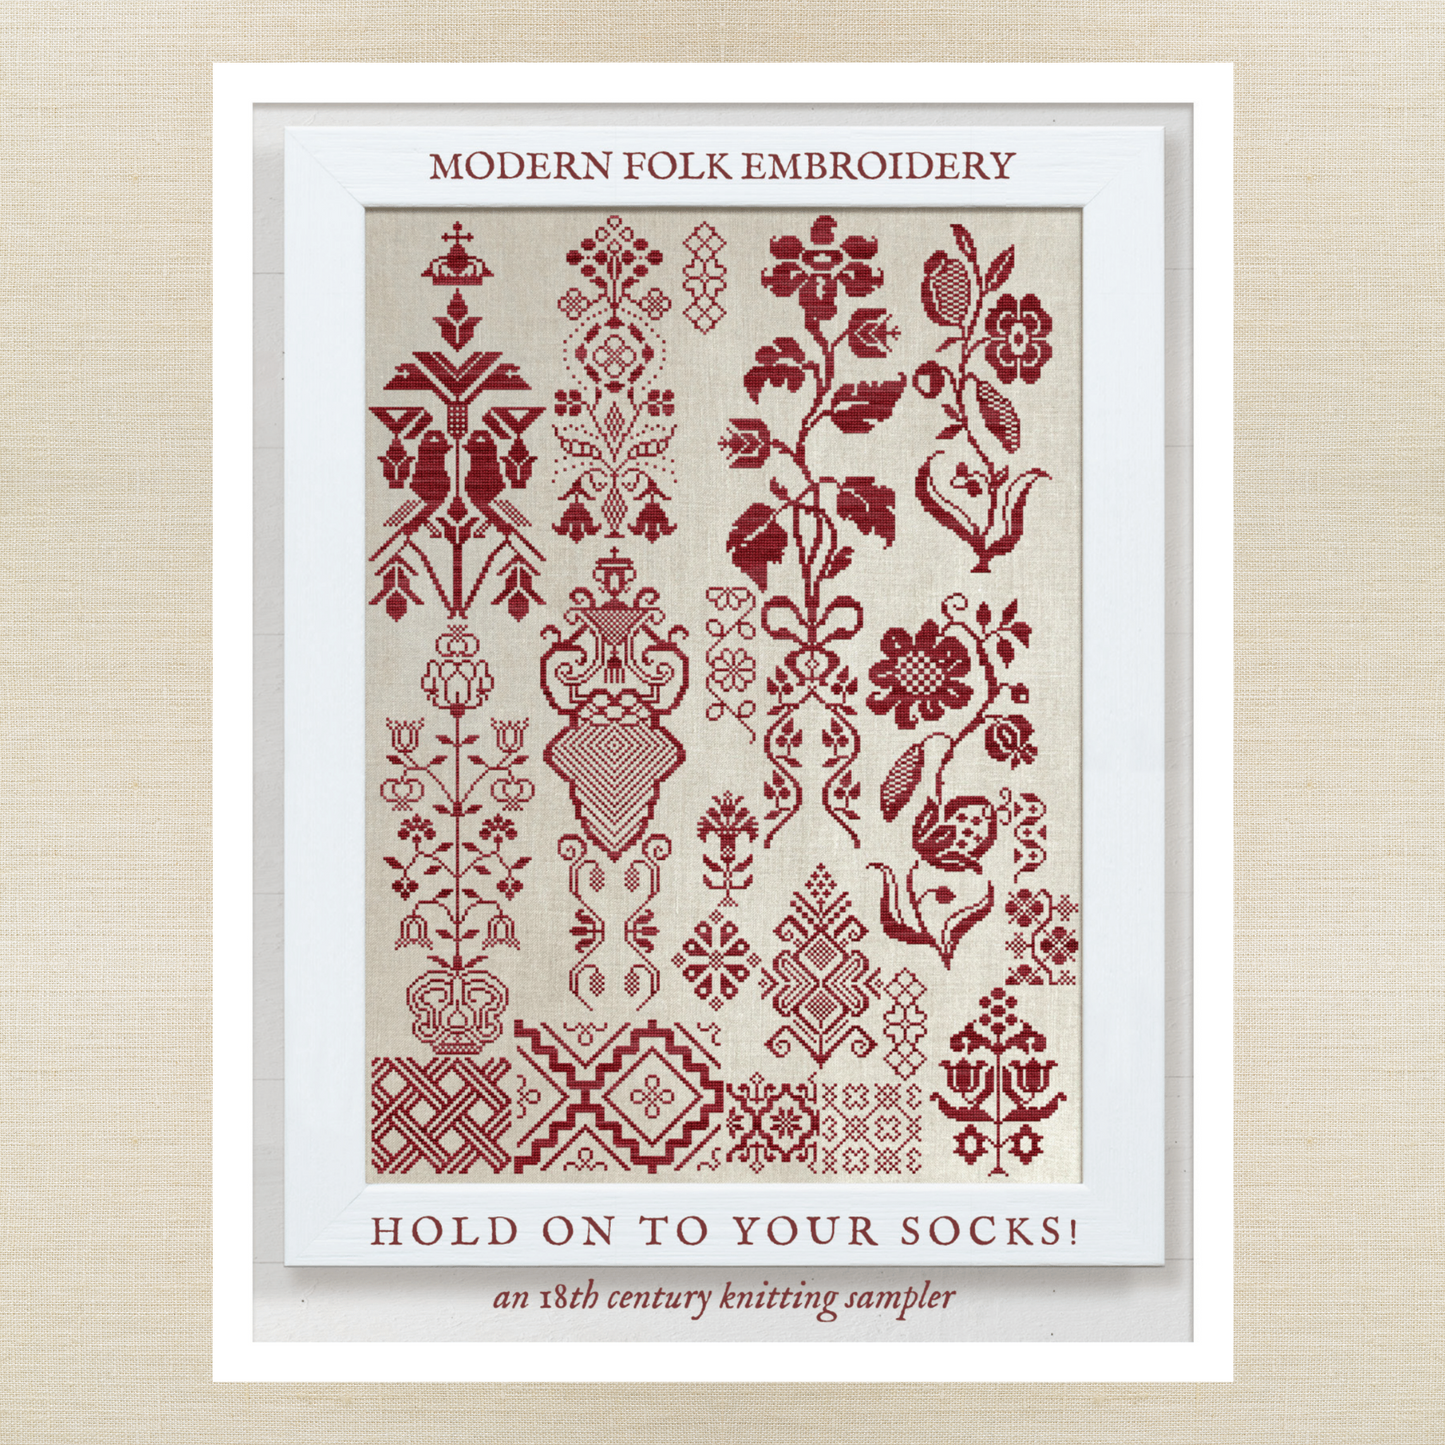 Modern Folk Embroidery - Hold On To Your Socks! - Booklet Chart